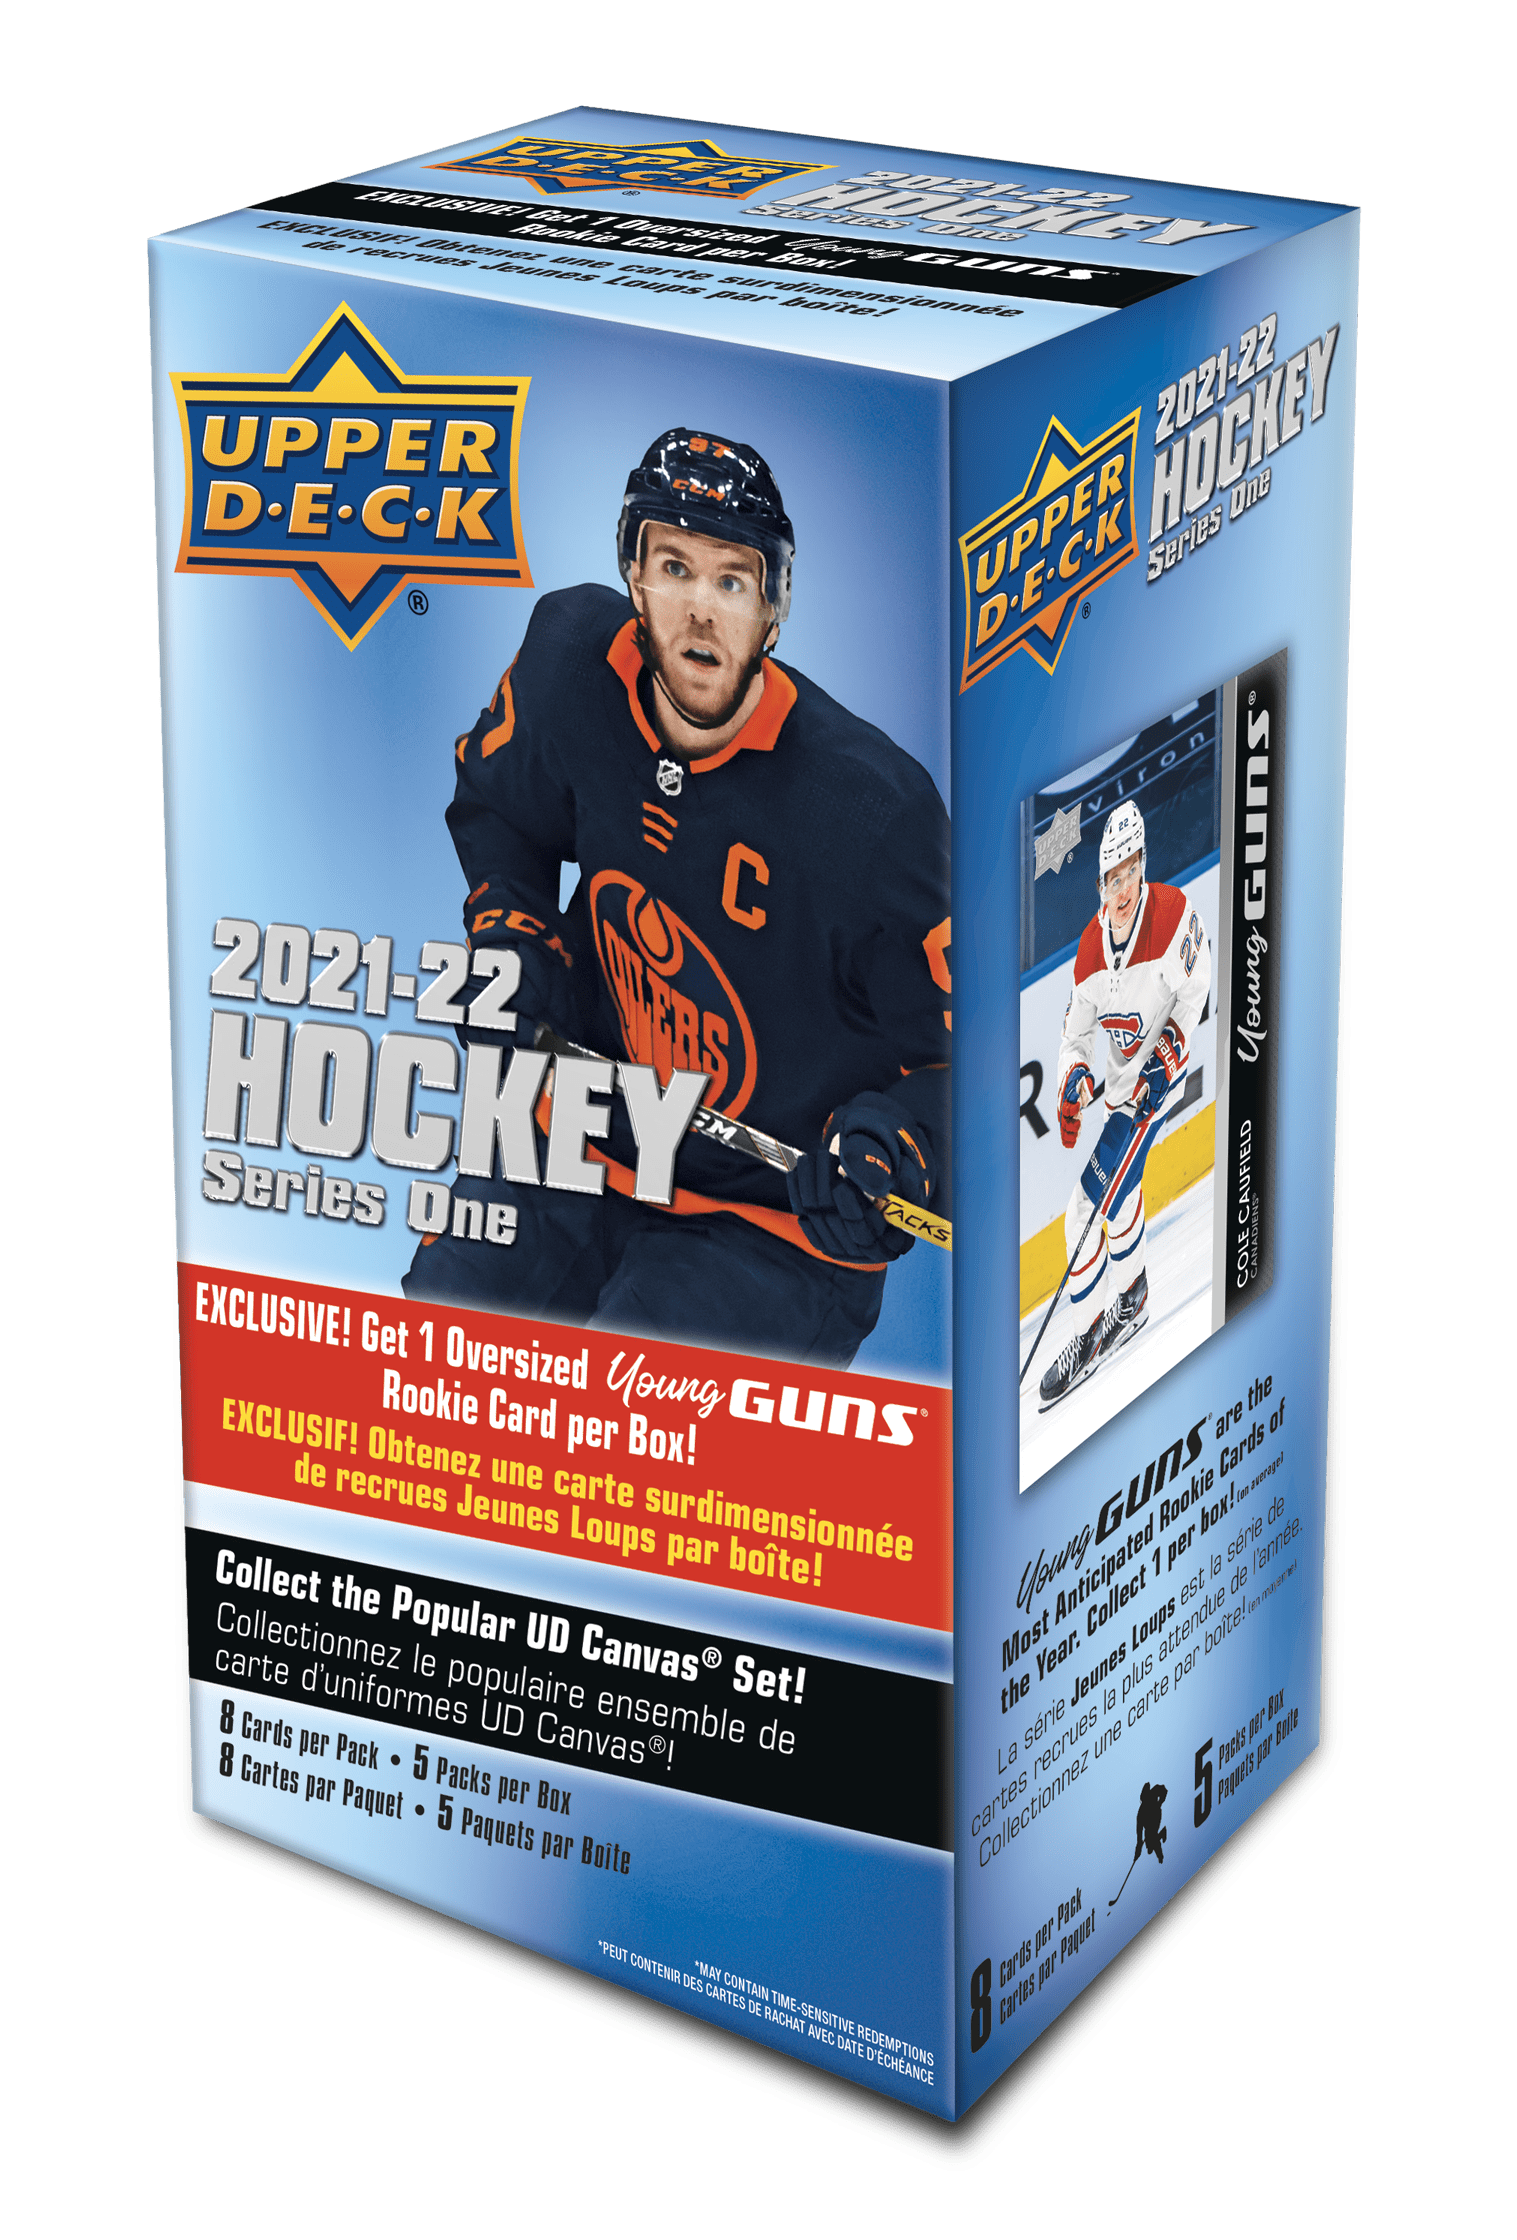 2021-22 Upper Deck Series 1 and 2 Hockey Checklists and Info